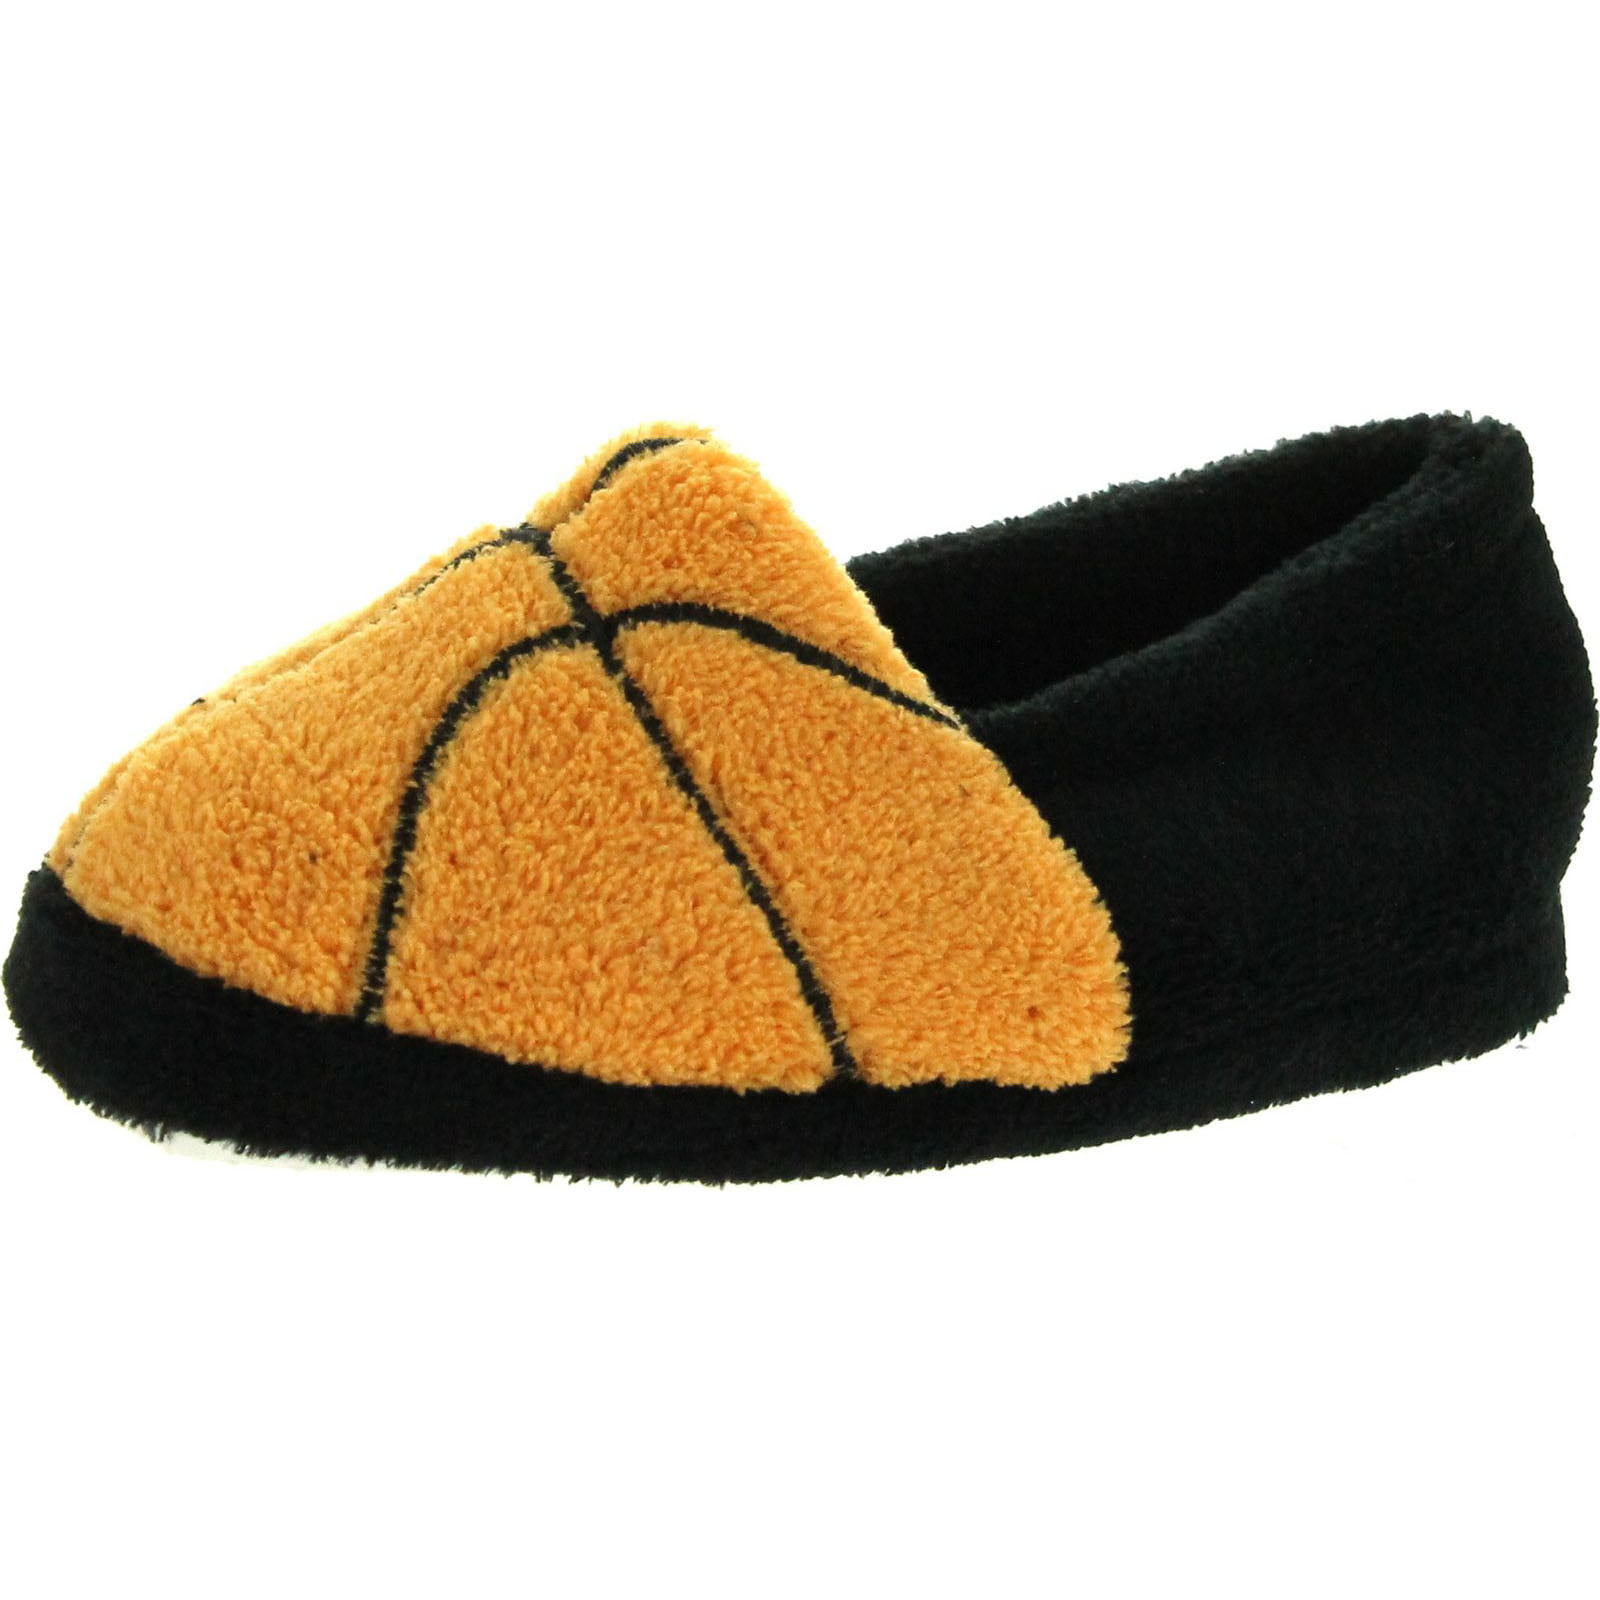 Sports Toddler Slippers 